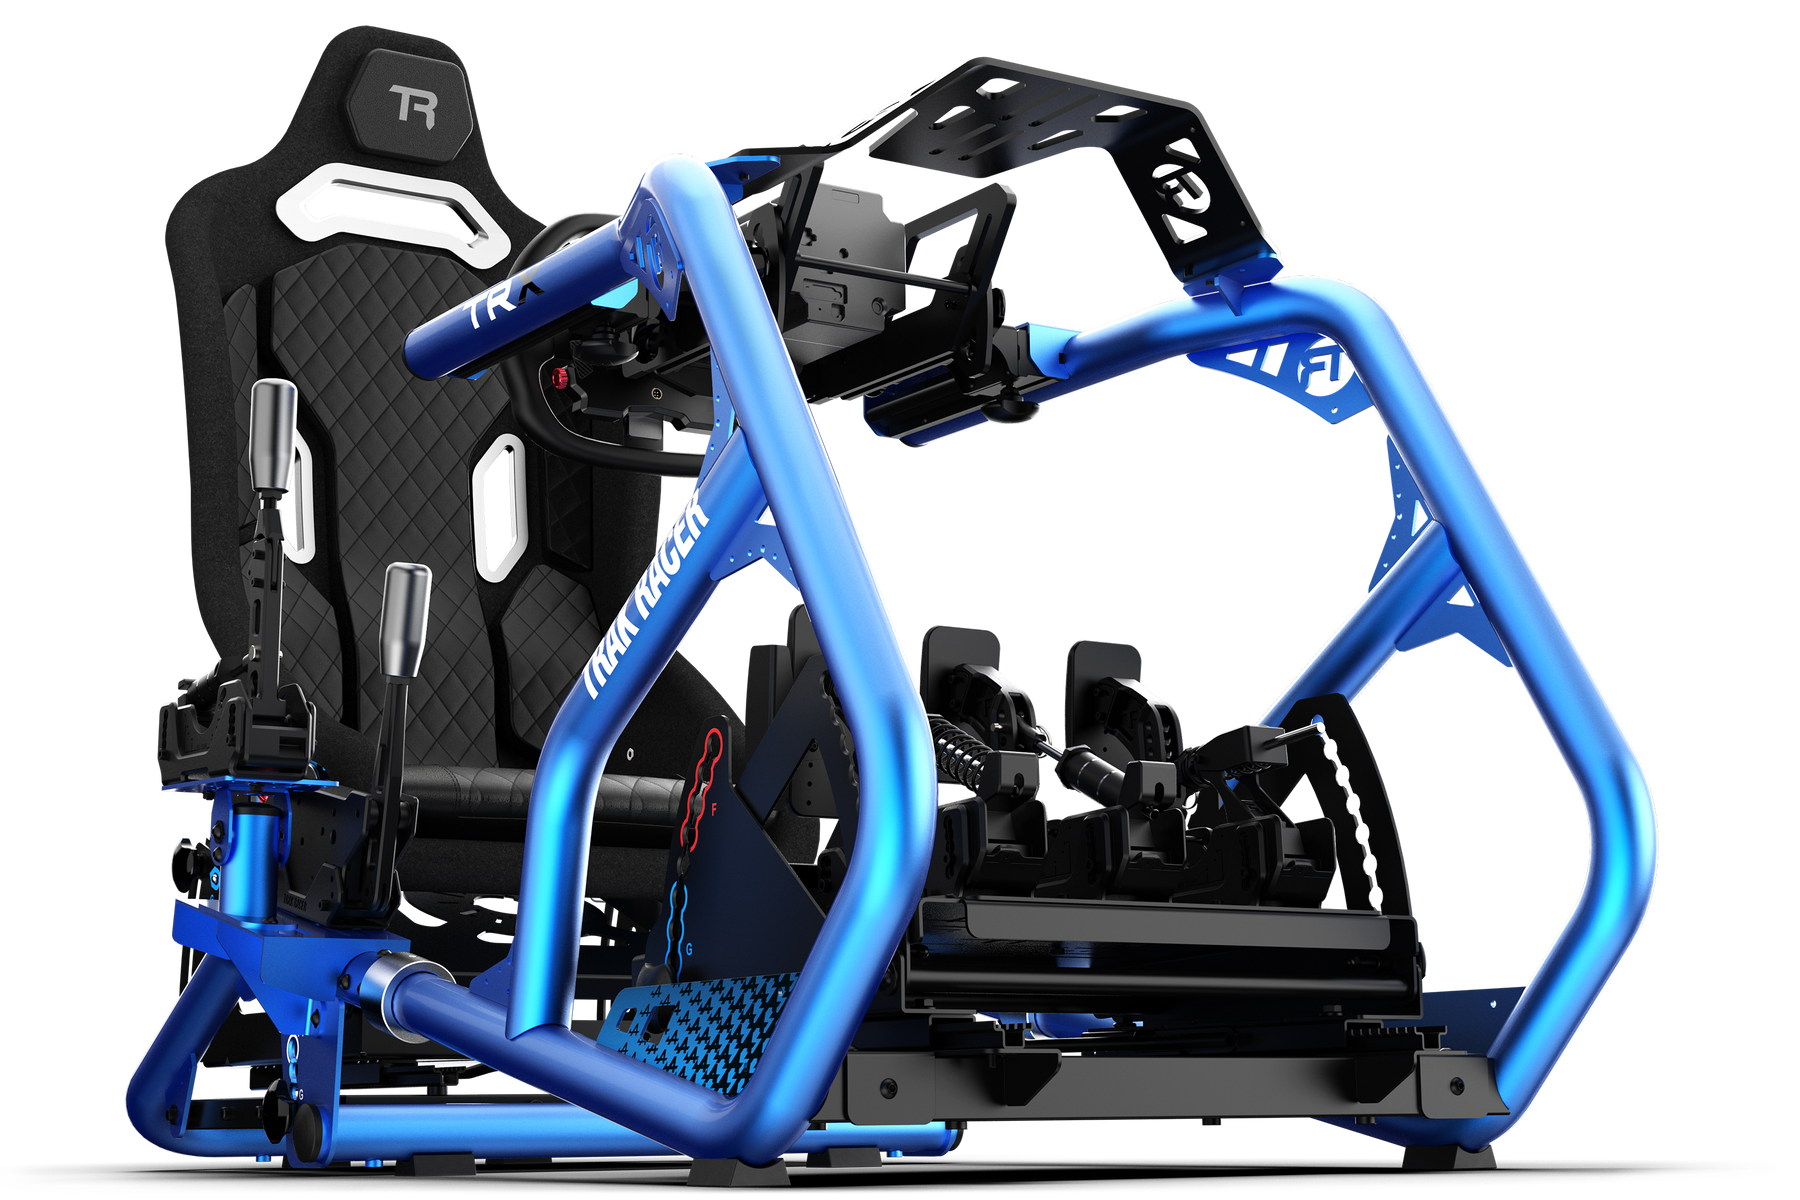 Detailed look: The making of a sim racing setup